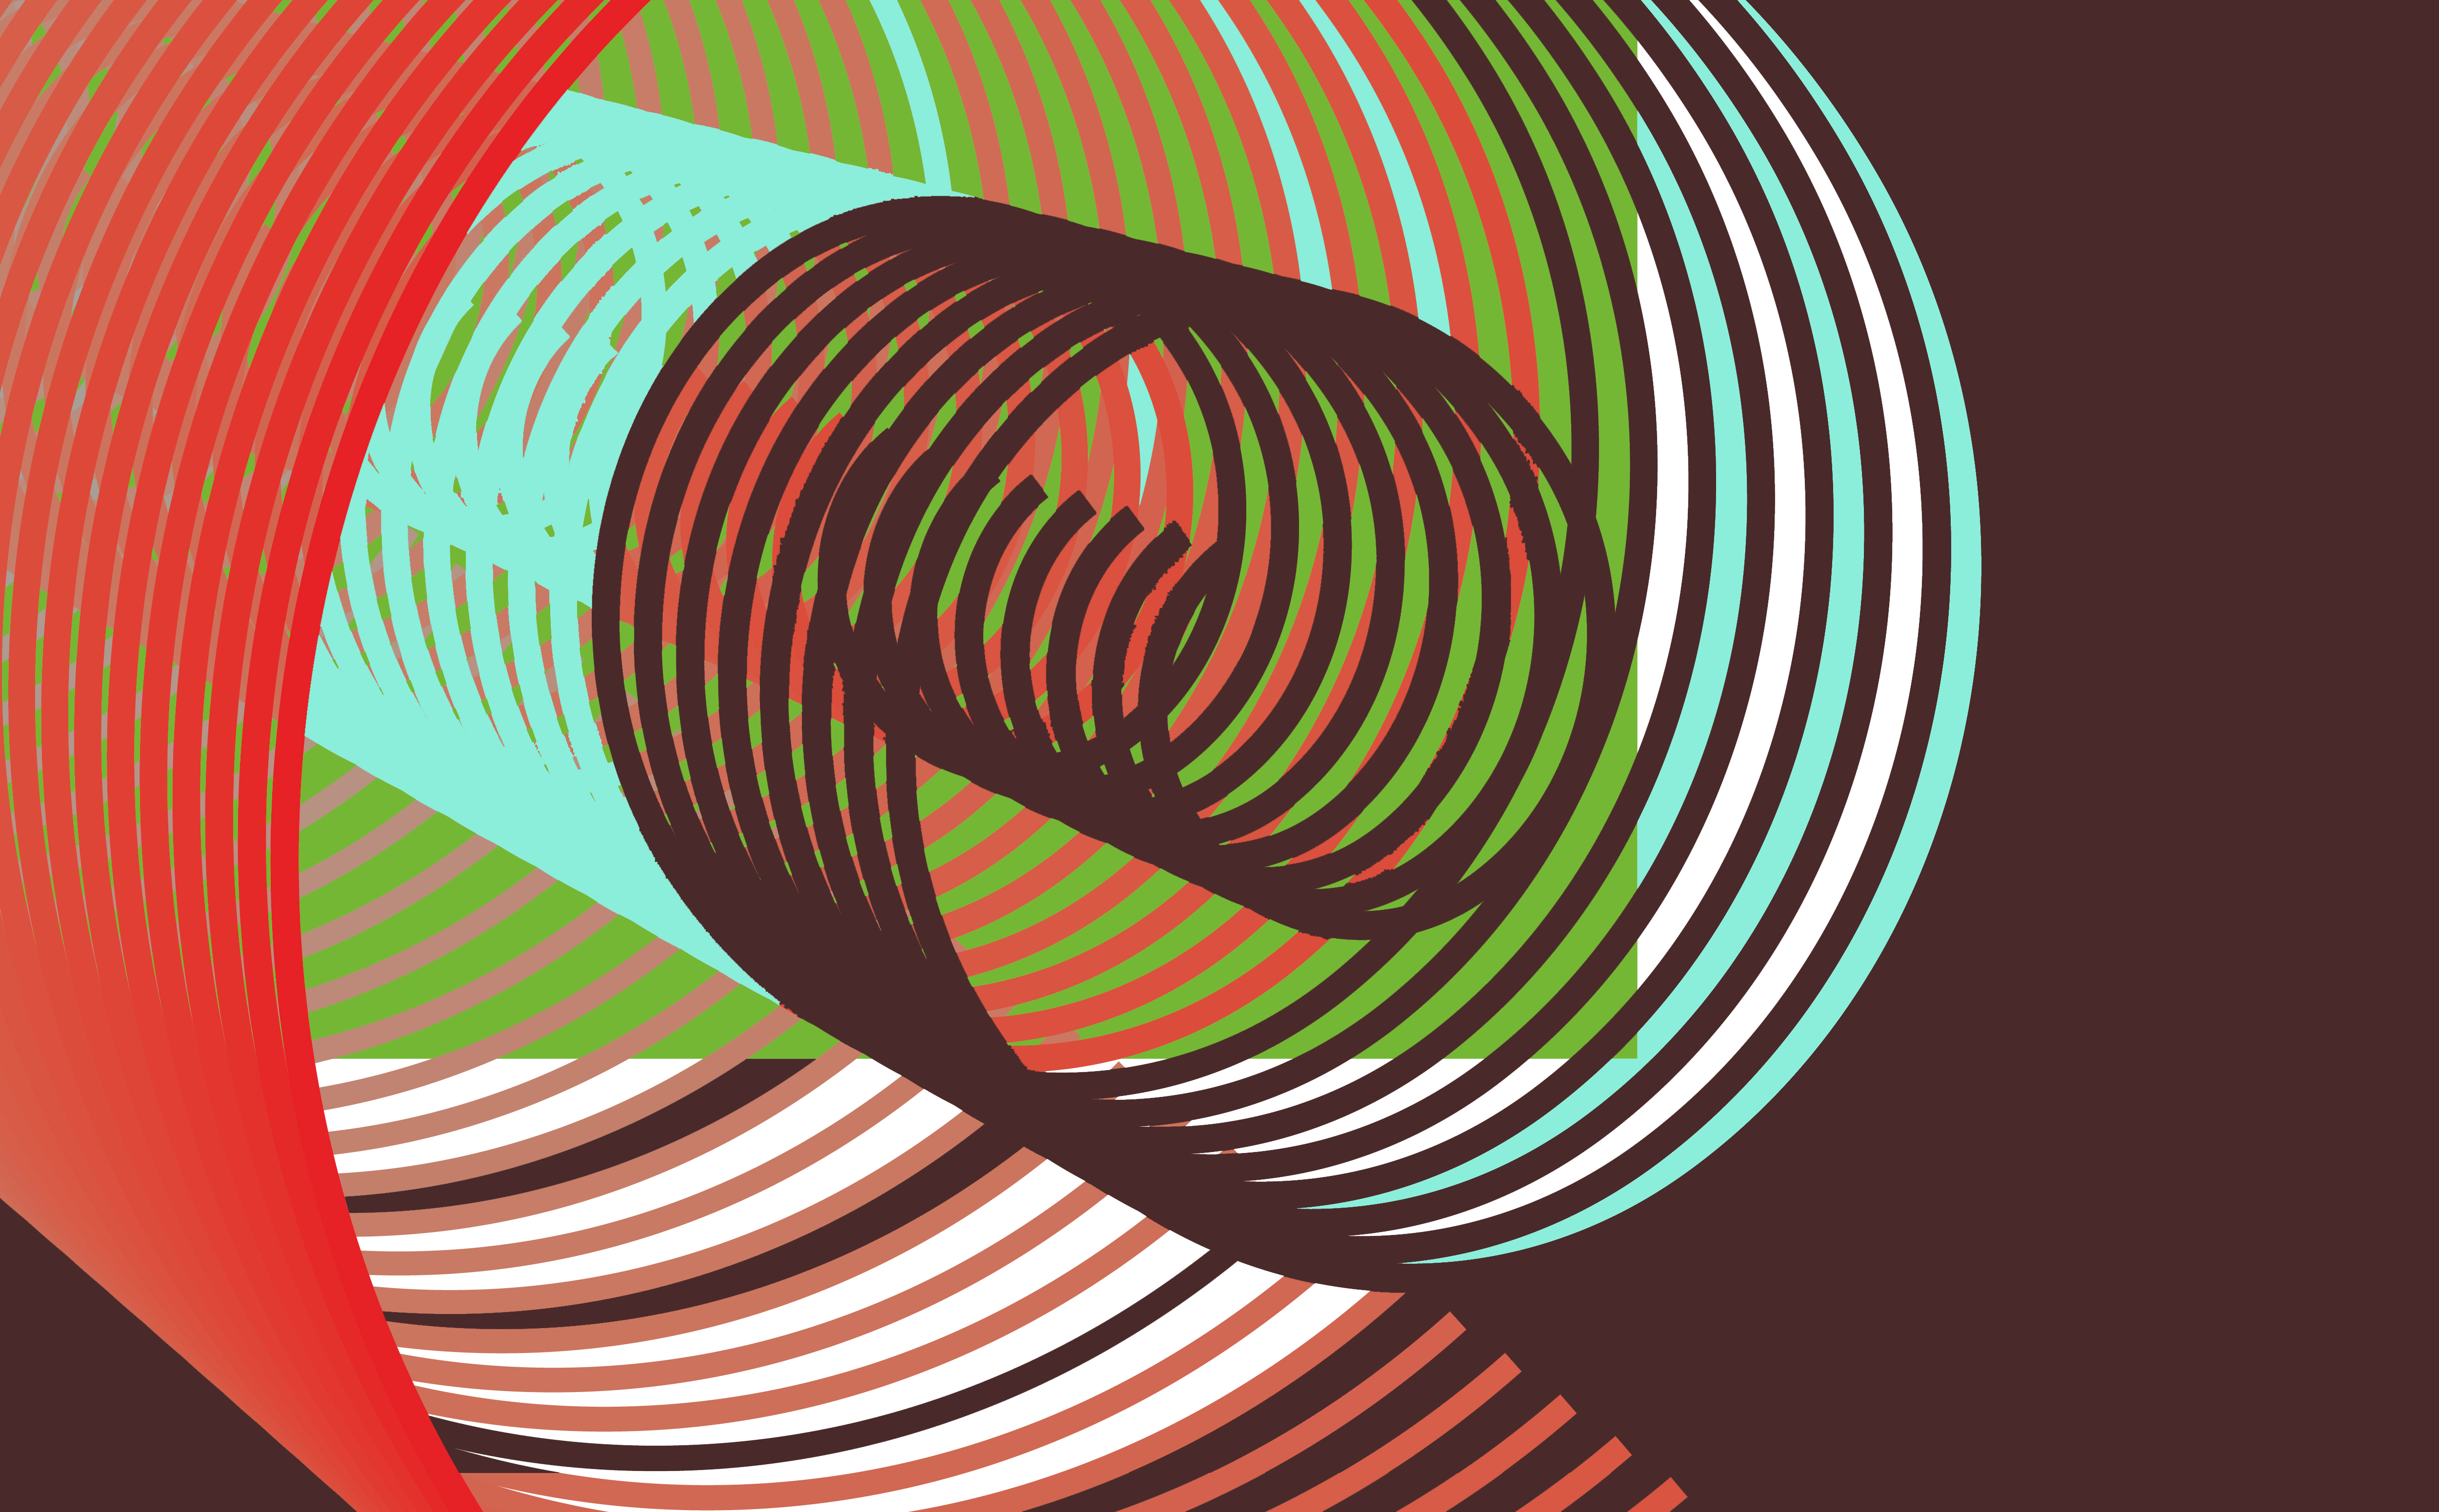 abstract, lines, rotation, colorful, colourful, illusion Image for desktop